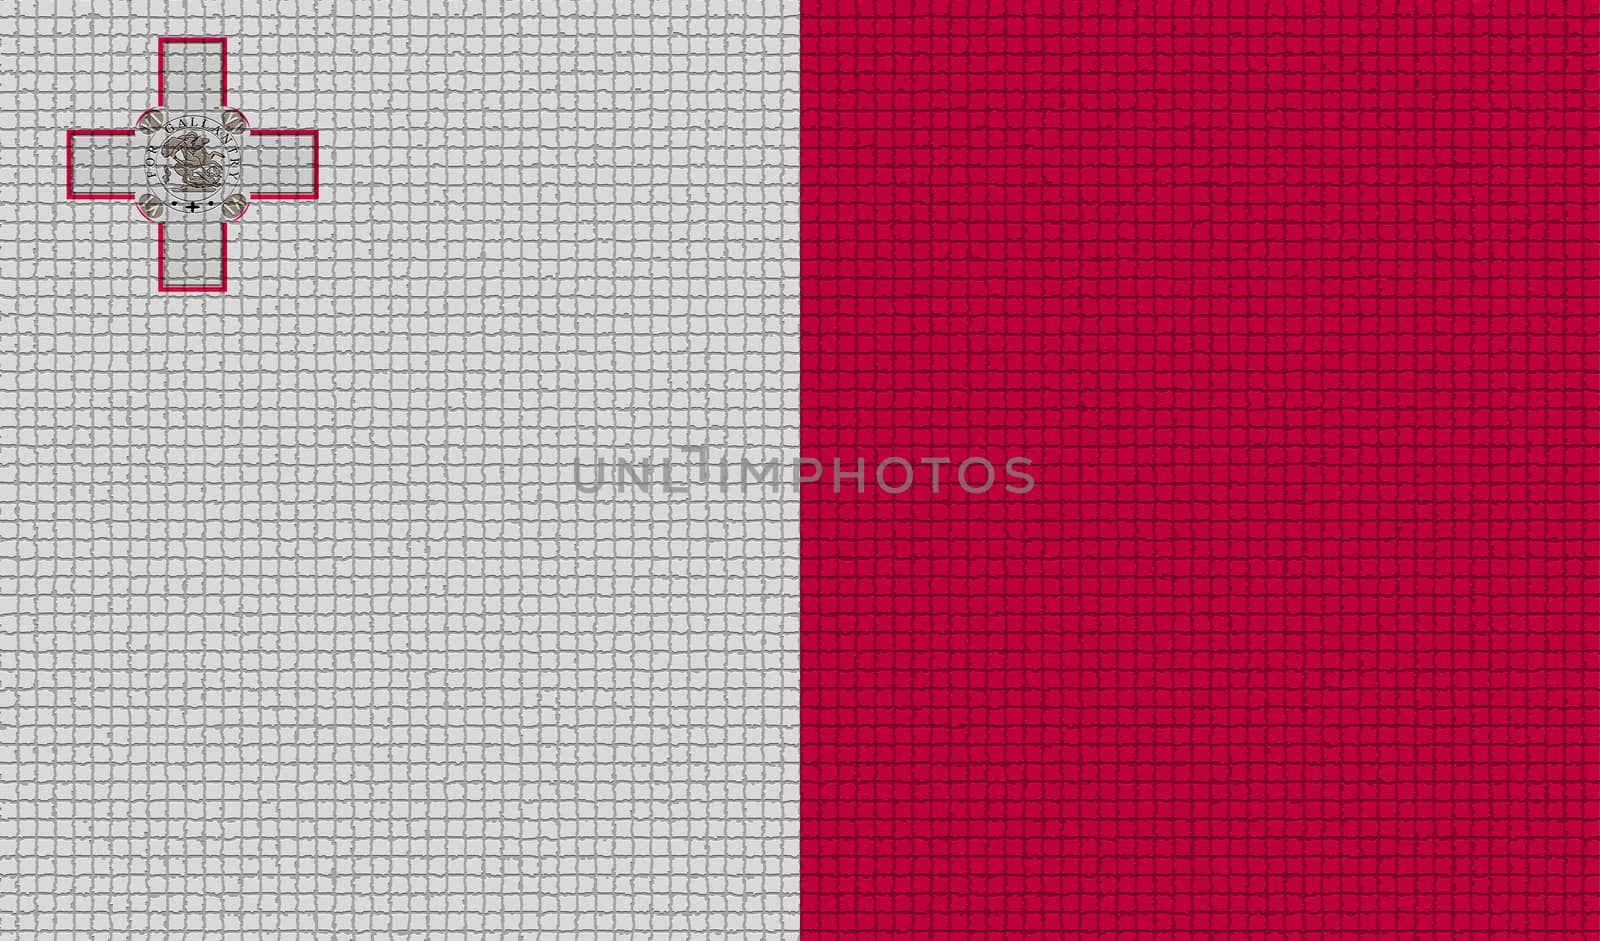 Flags of Malta with abstract textures. Rasterized version